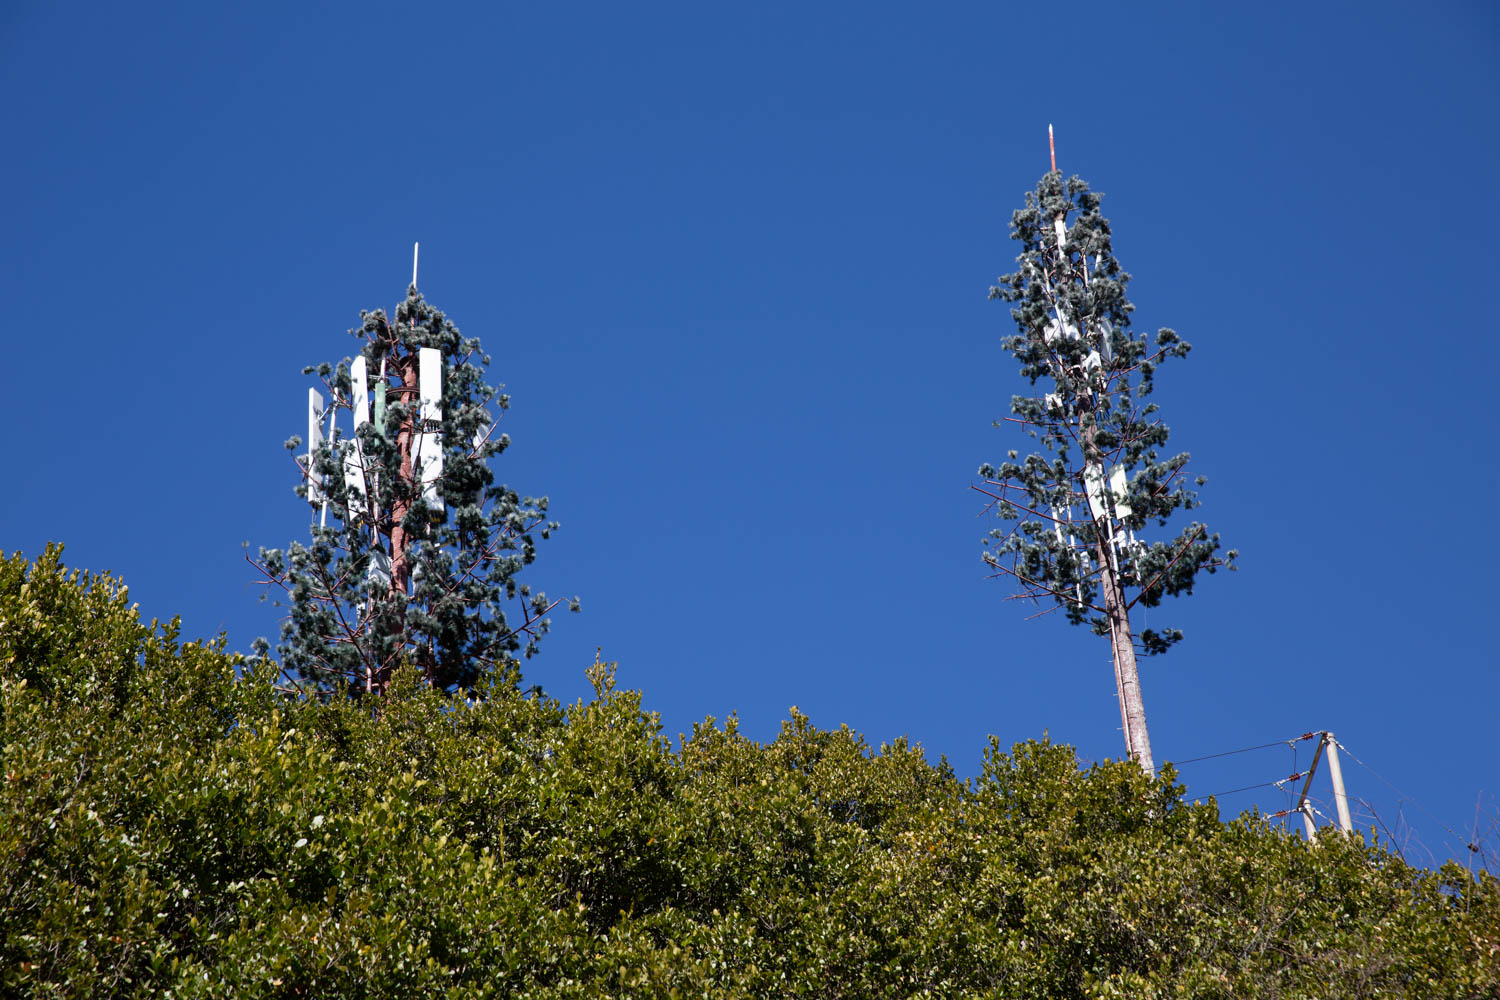 They made the cellular towers look like trees